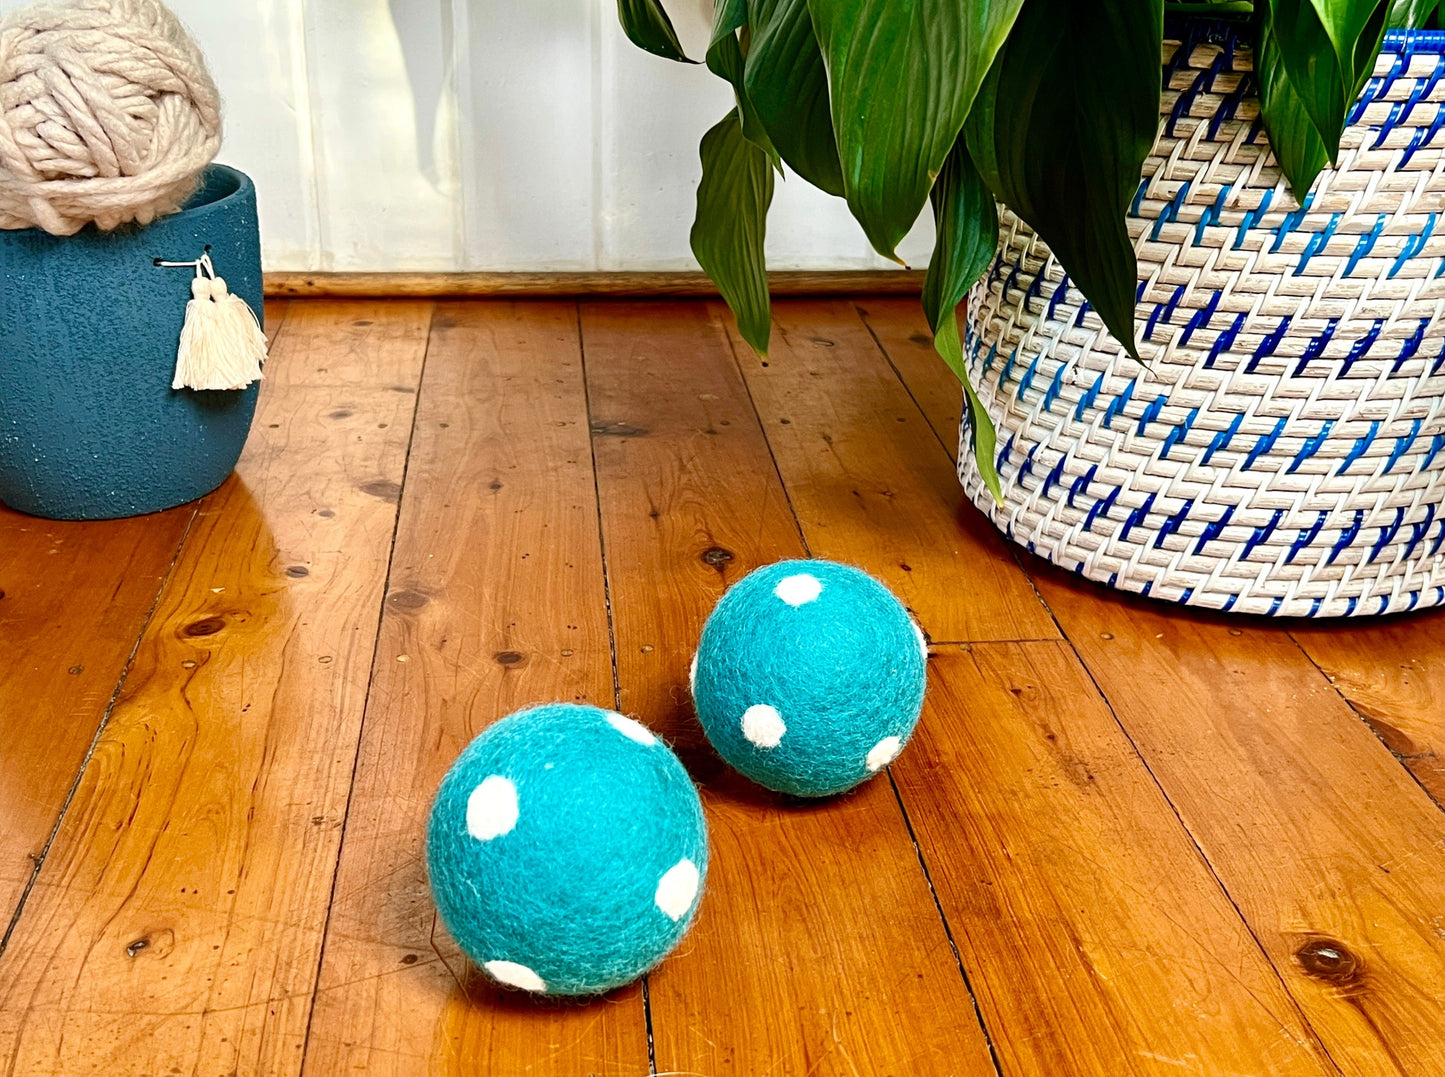 Dog Toys - beautiful blue felt balls with white dogs, on a wooden floor. Perfect soft dog toy for indoor play.